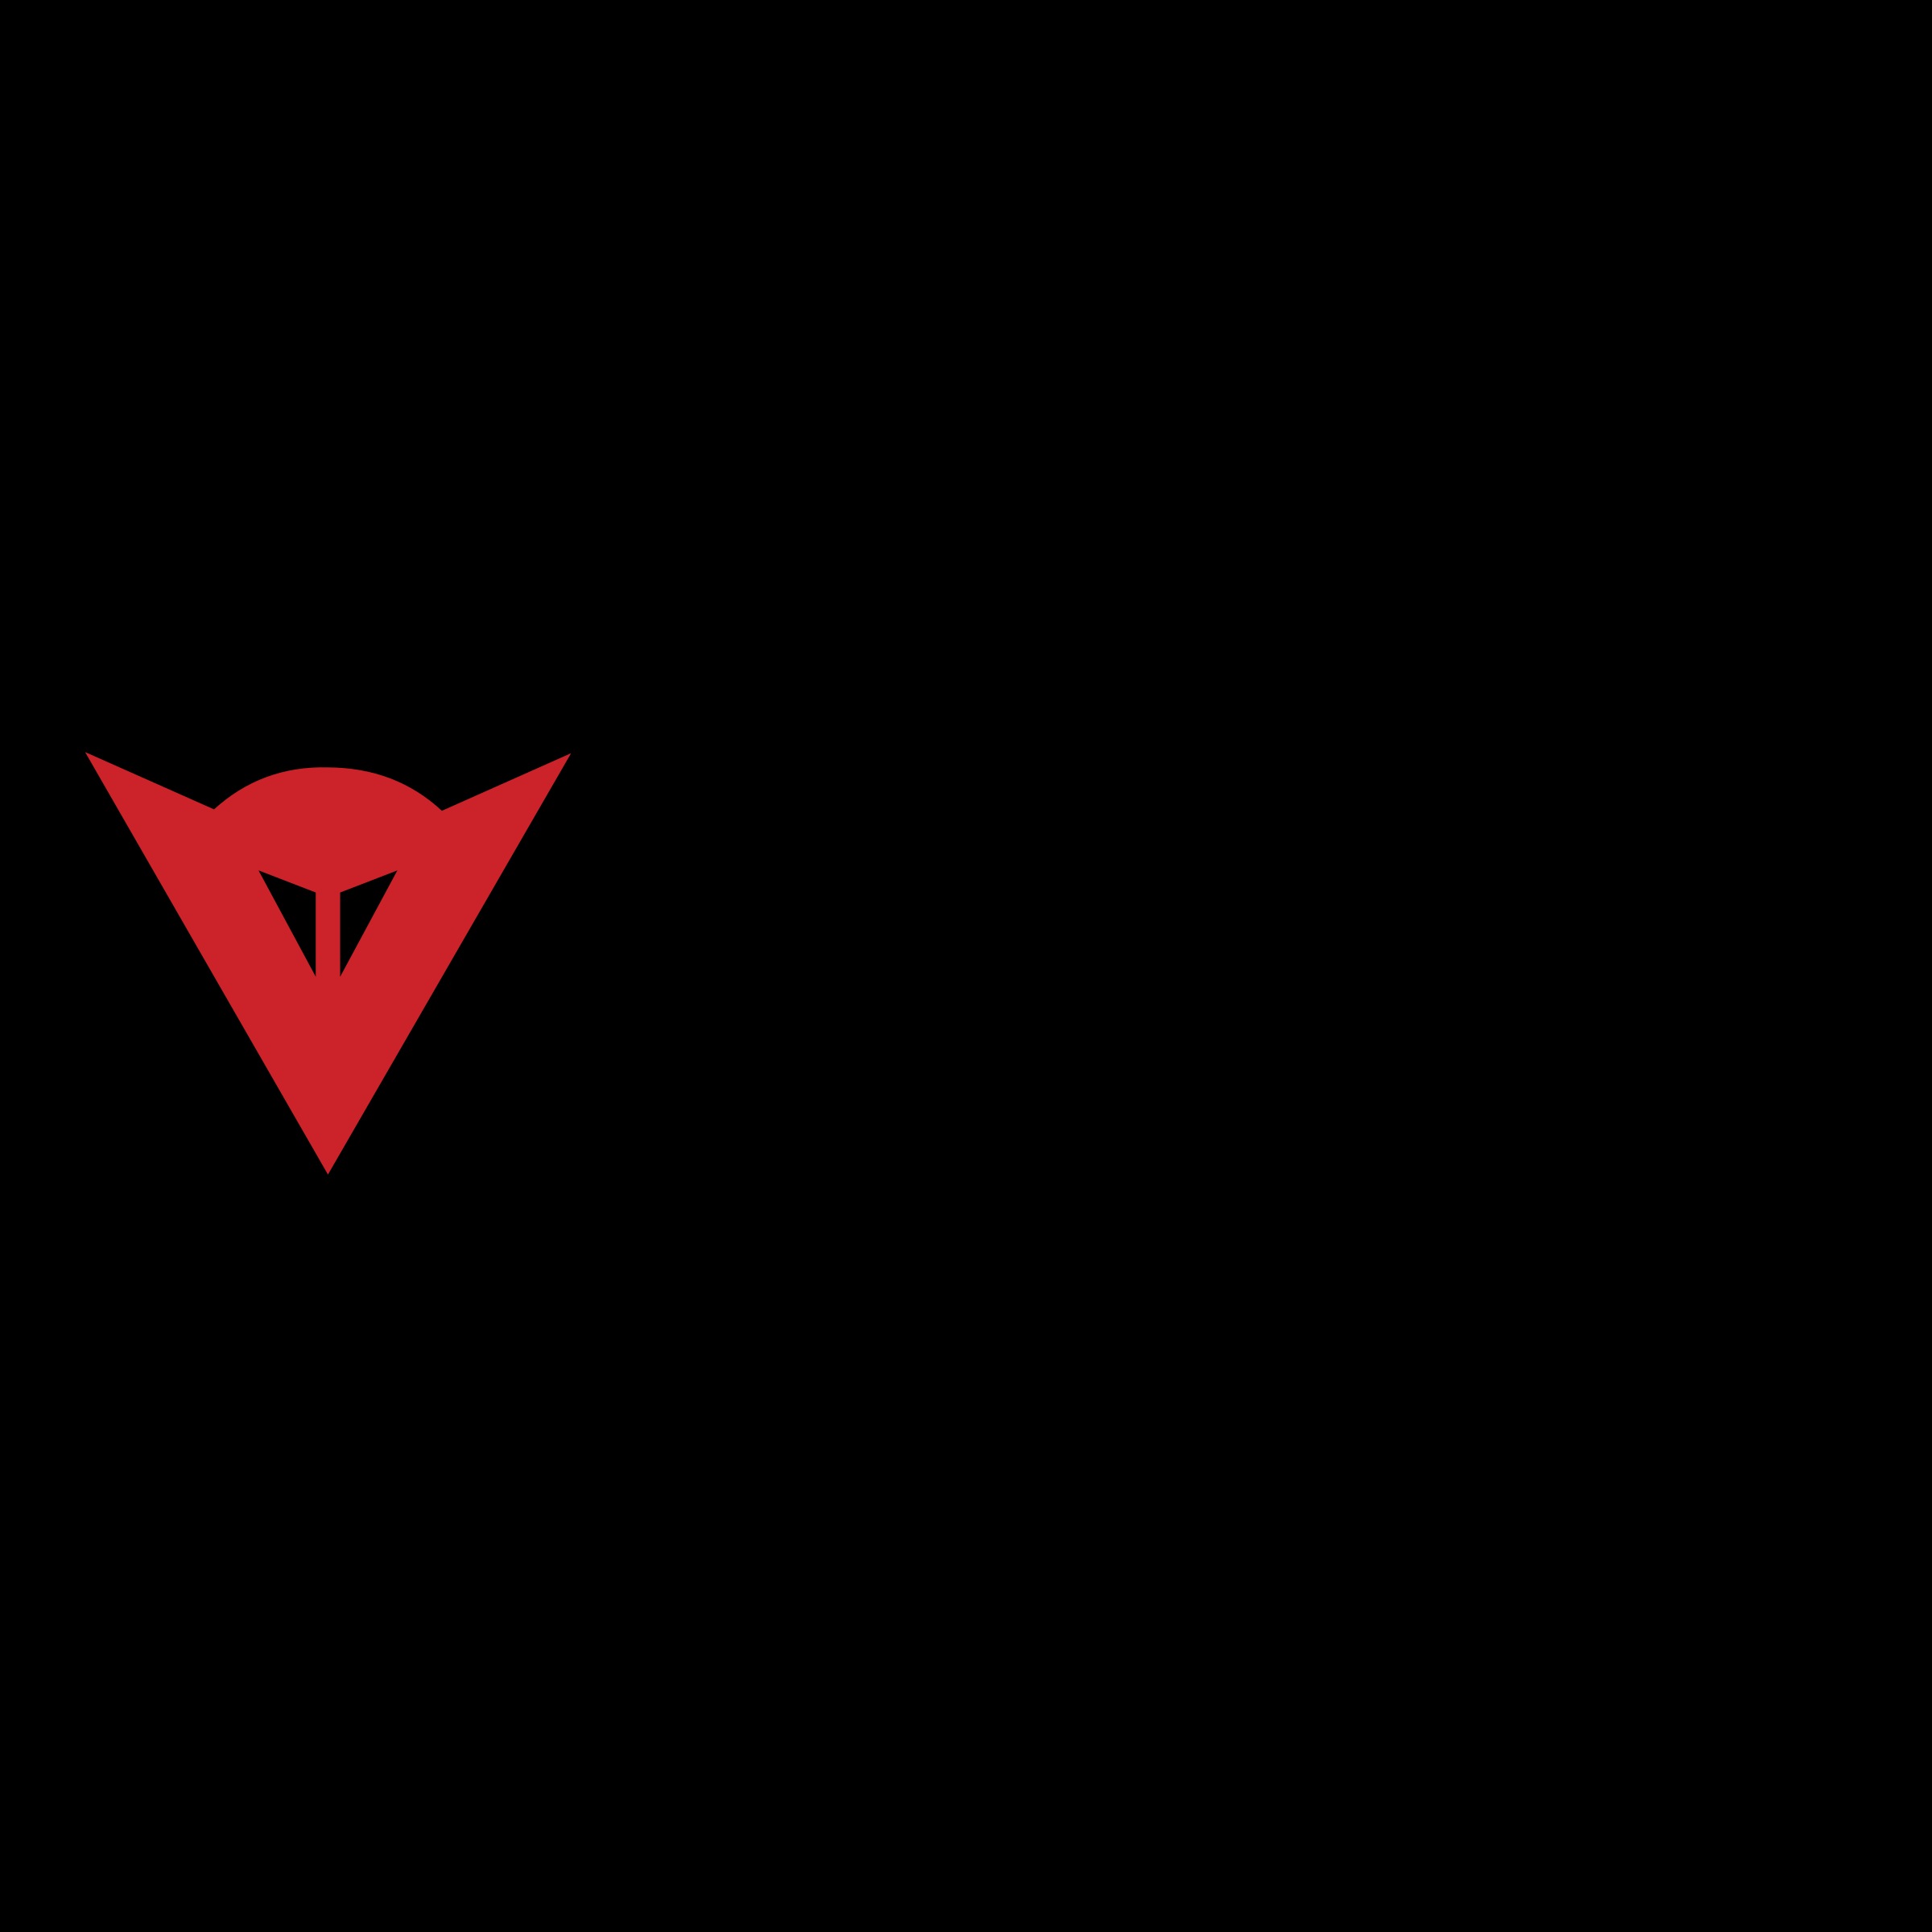 Dainese Logo - Dainese Logo PNG Transparent & SVG Vector - Freebie Supply